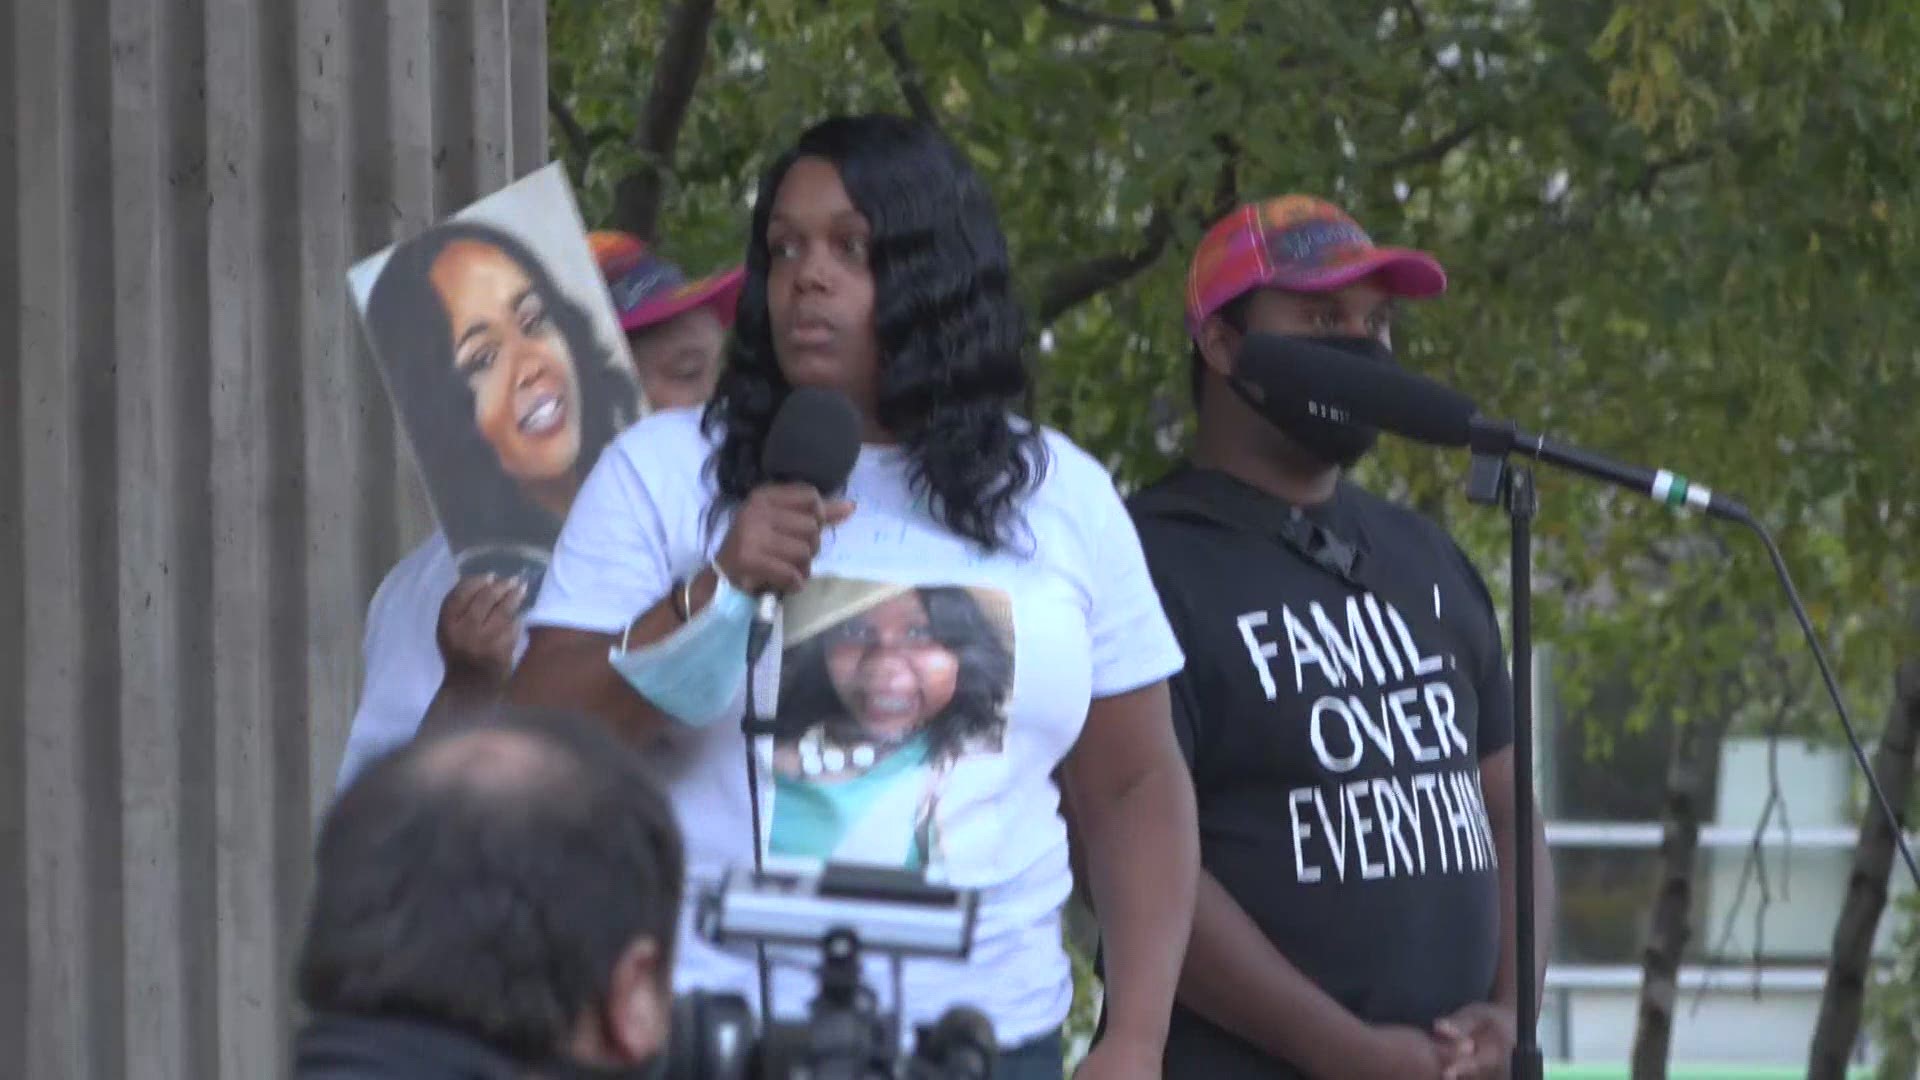 Family members of Breonna Taylor are not happy with the grand jury decision in Taylor's case.